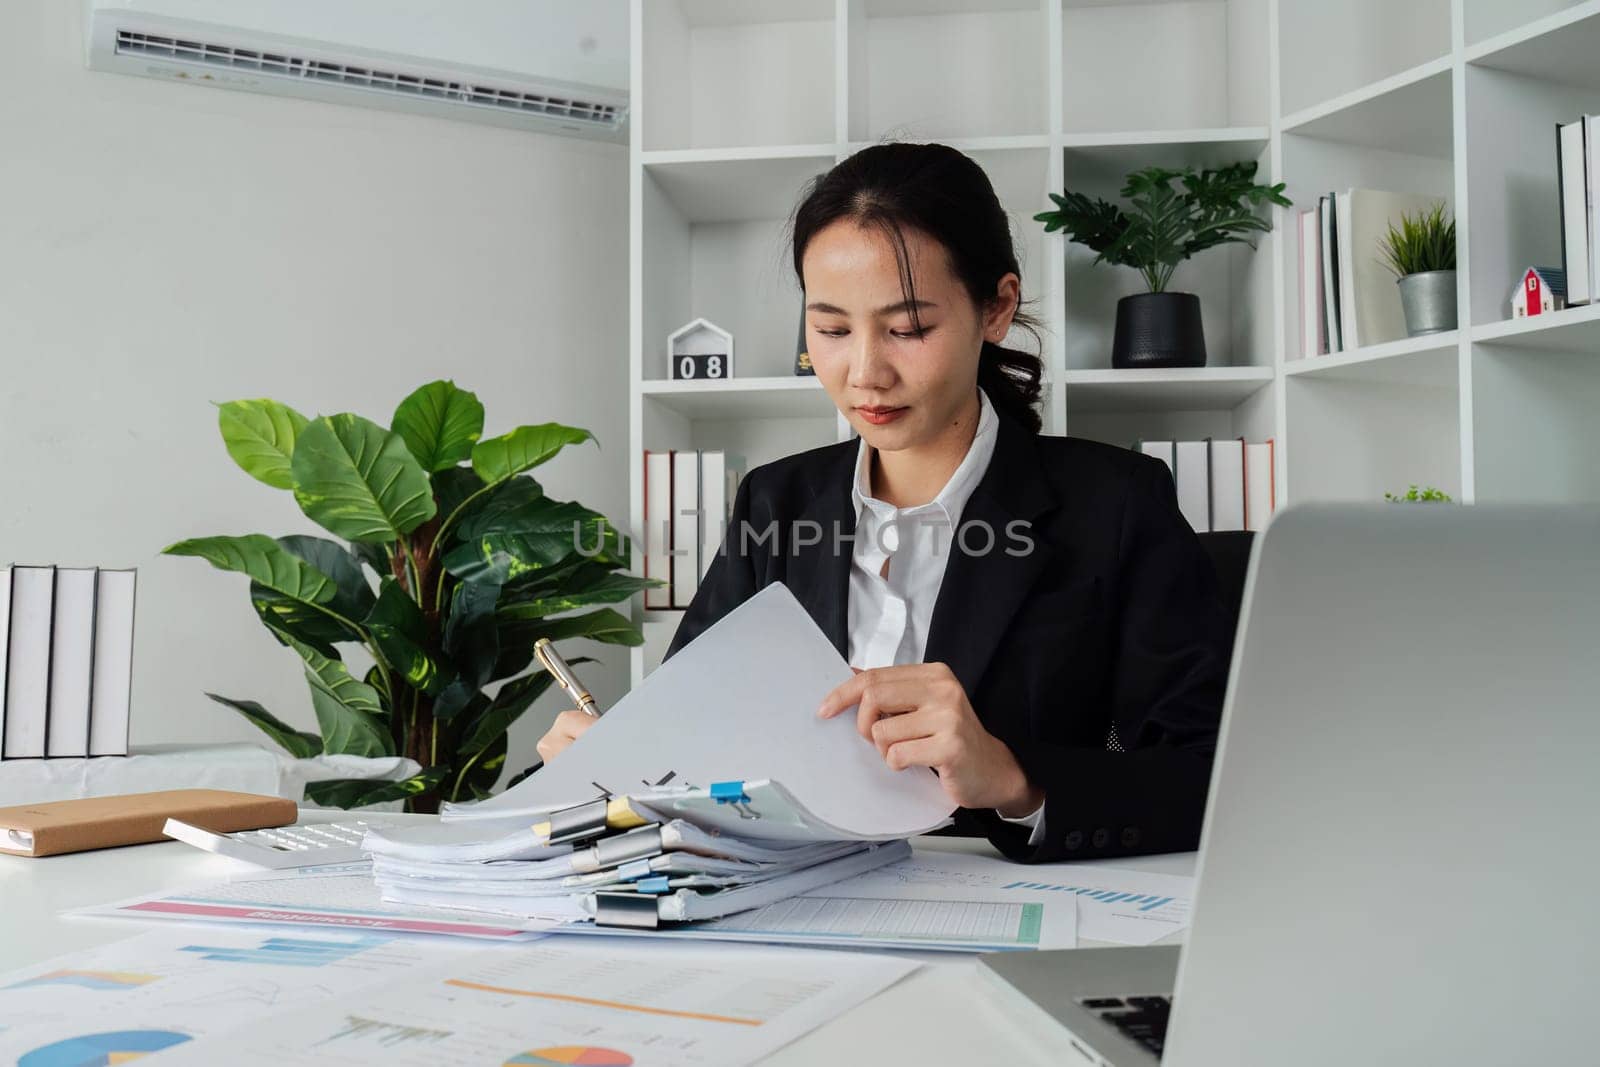 A woman is writing on a piece of paper with a pen. She is wearing a black suit and is sitting at a desk. The paper has a lot of numbers and calculations on it